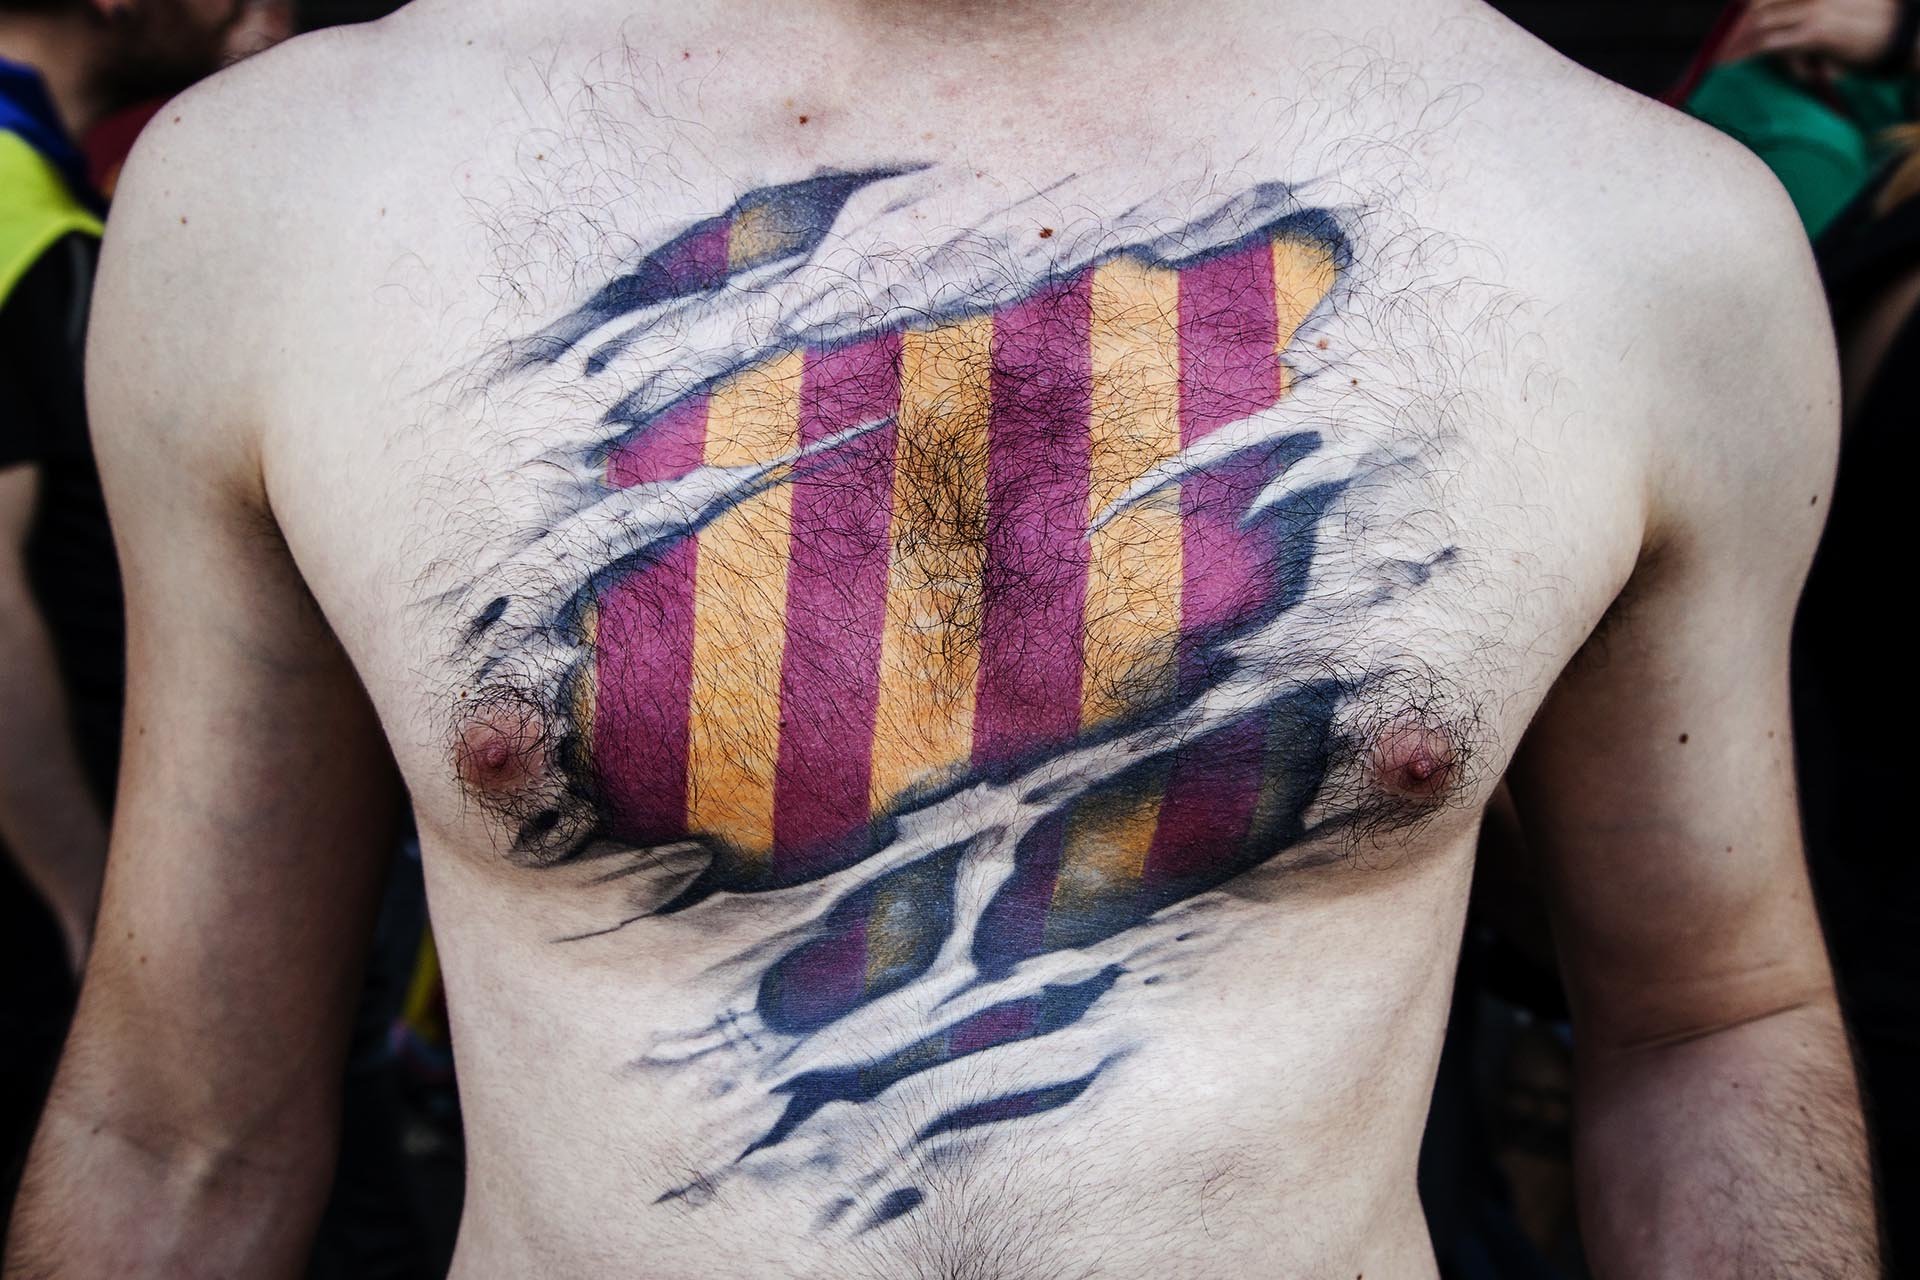 Protester in a demonstration for the police brutality lived in the referendum of 1 October for the independence of Catalonia, with a tattooed catalan flag.